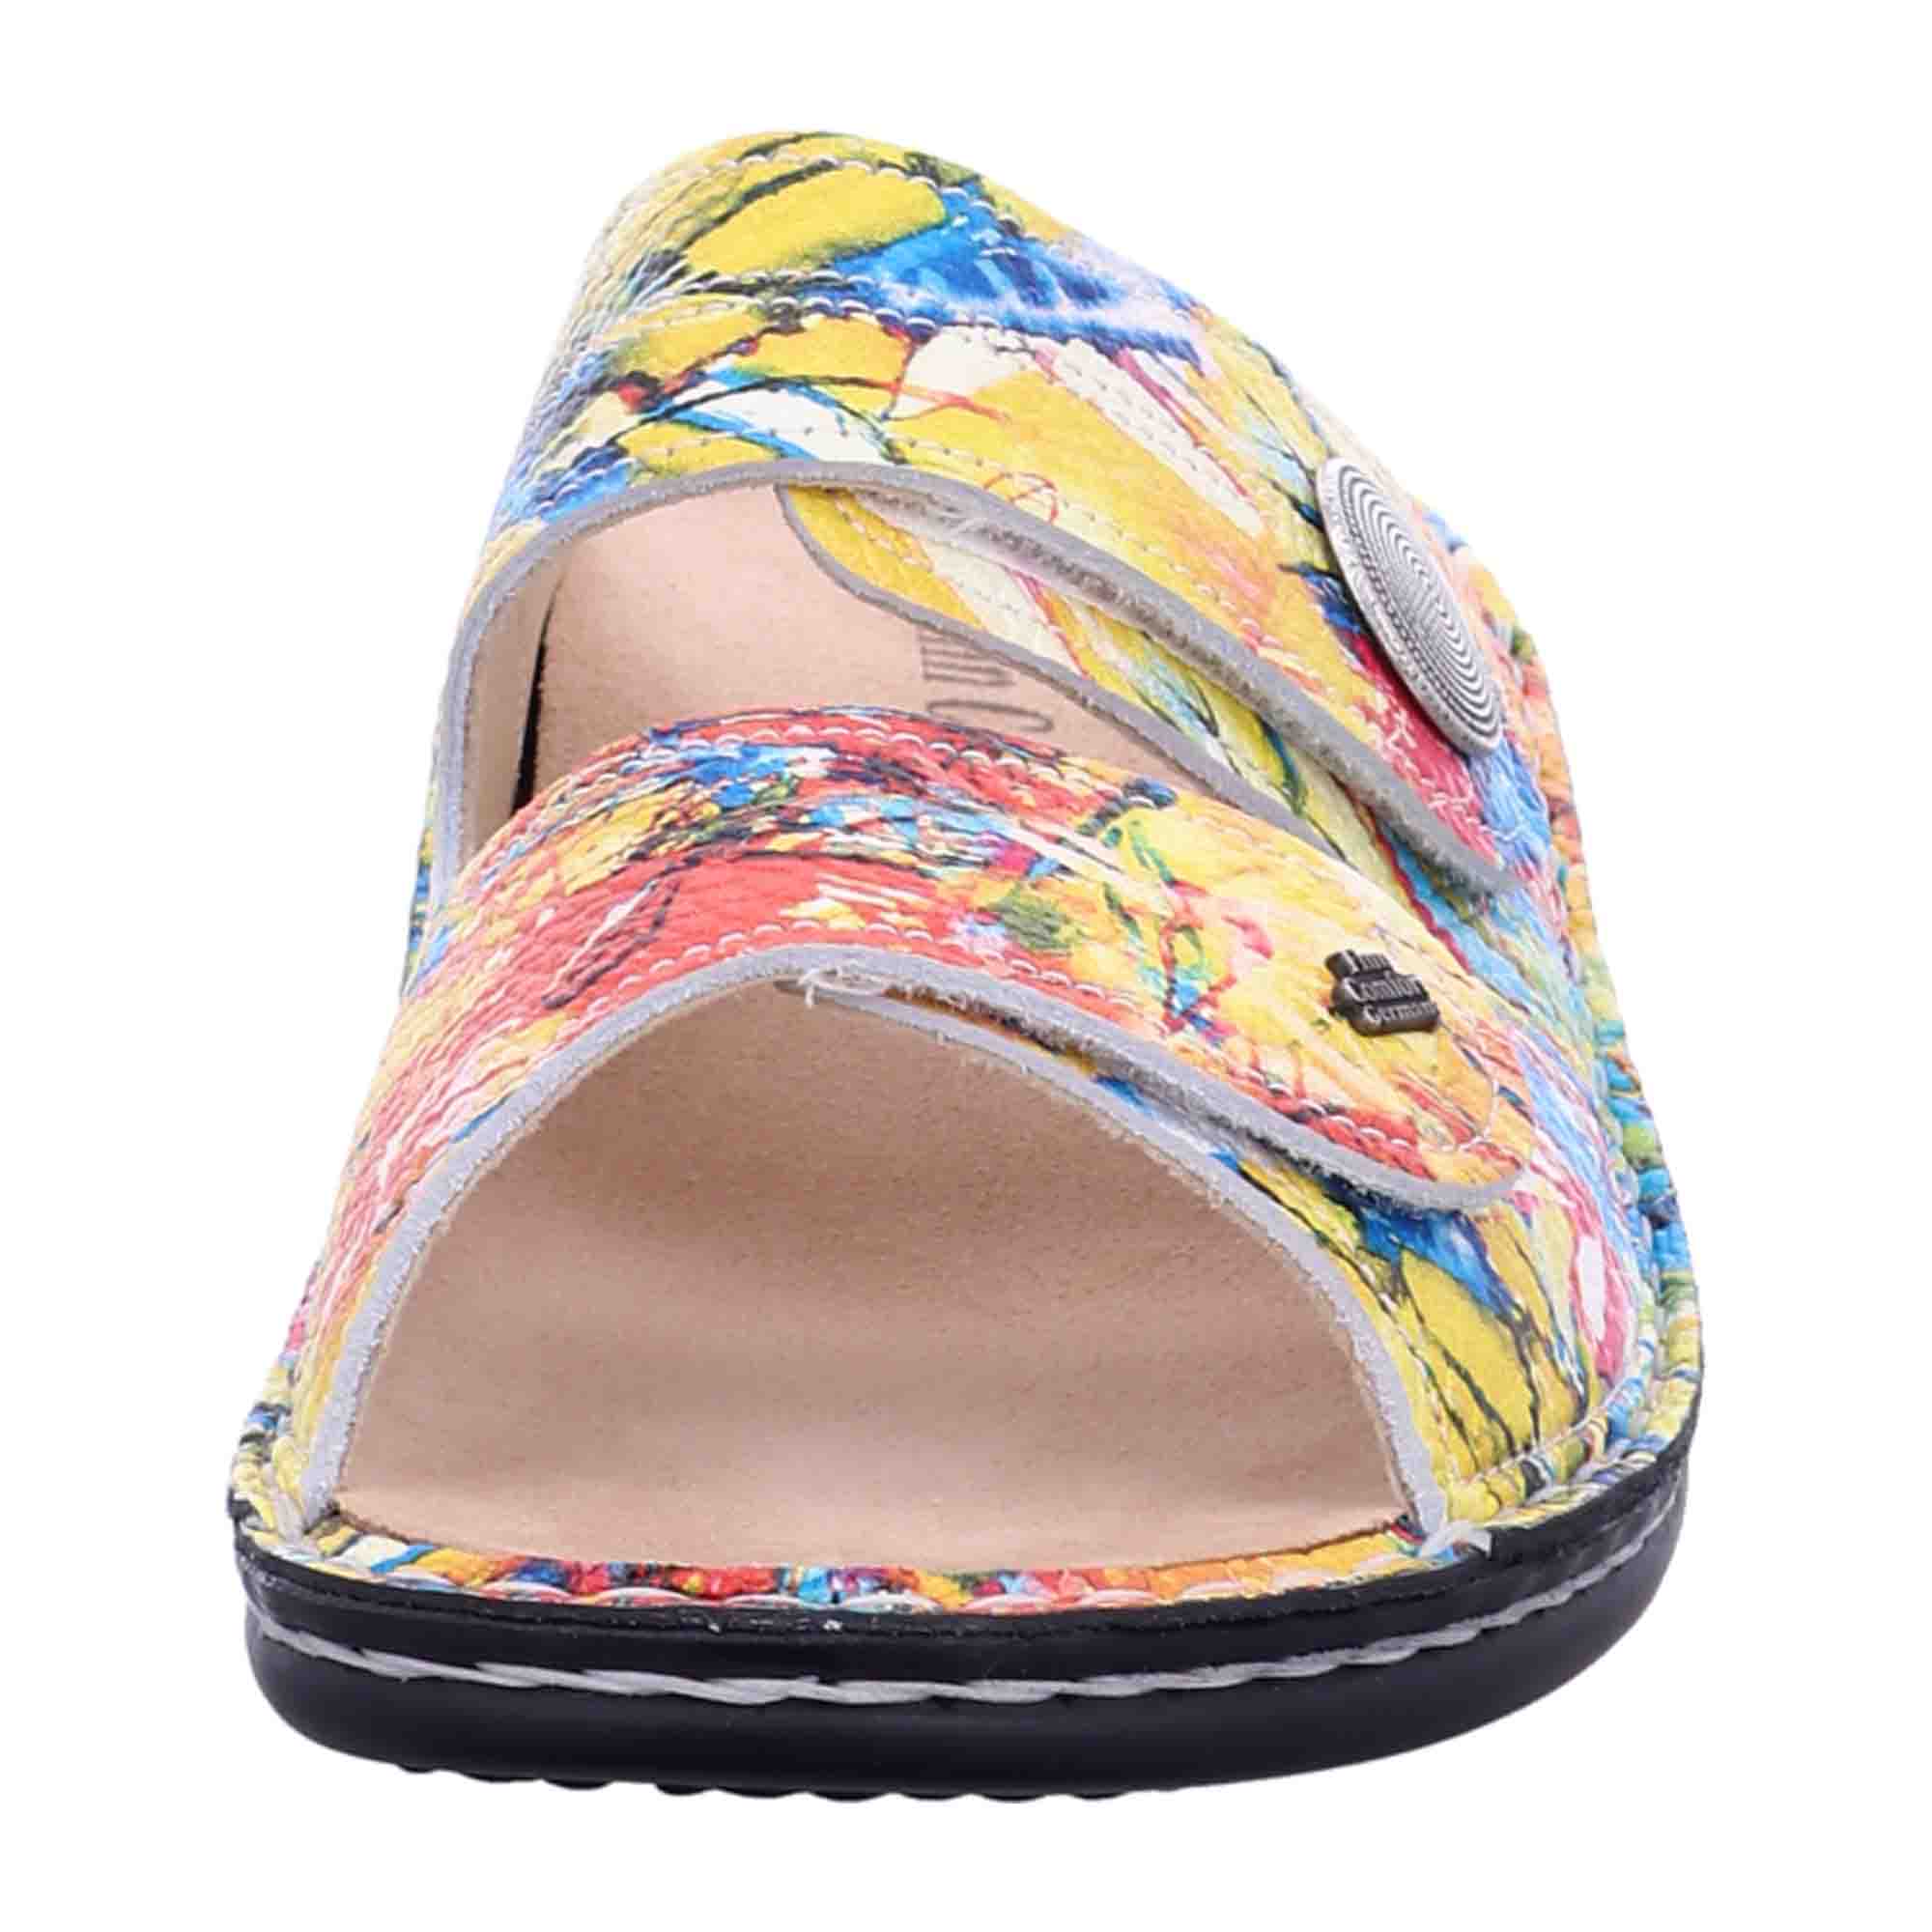 Finn Comfort Sansibar Multi Women's Sandals - Colorful Leather Toe Separator with Soft Footbed